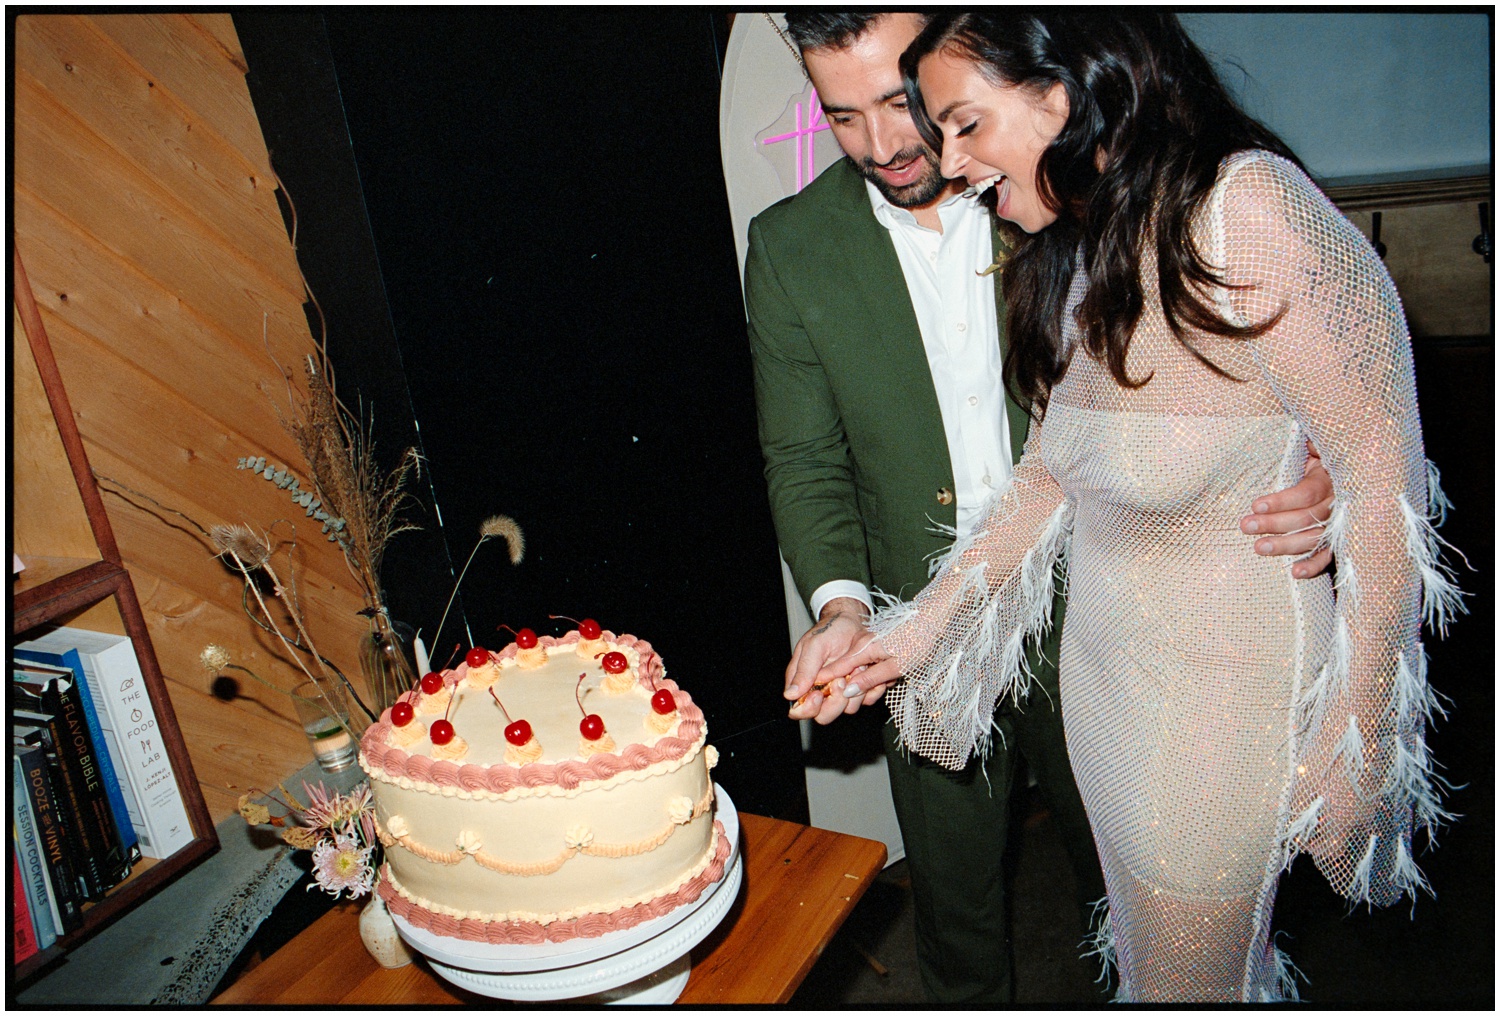 The couple ecstatically cuts their heart shaped cake at their Philadelphia wedding